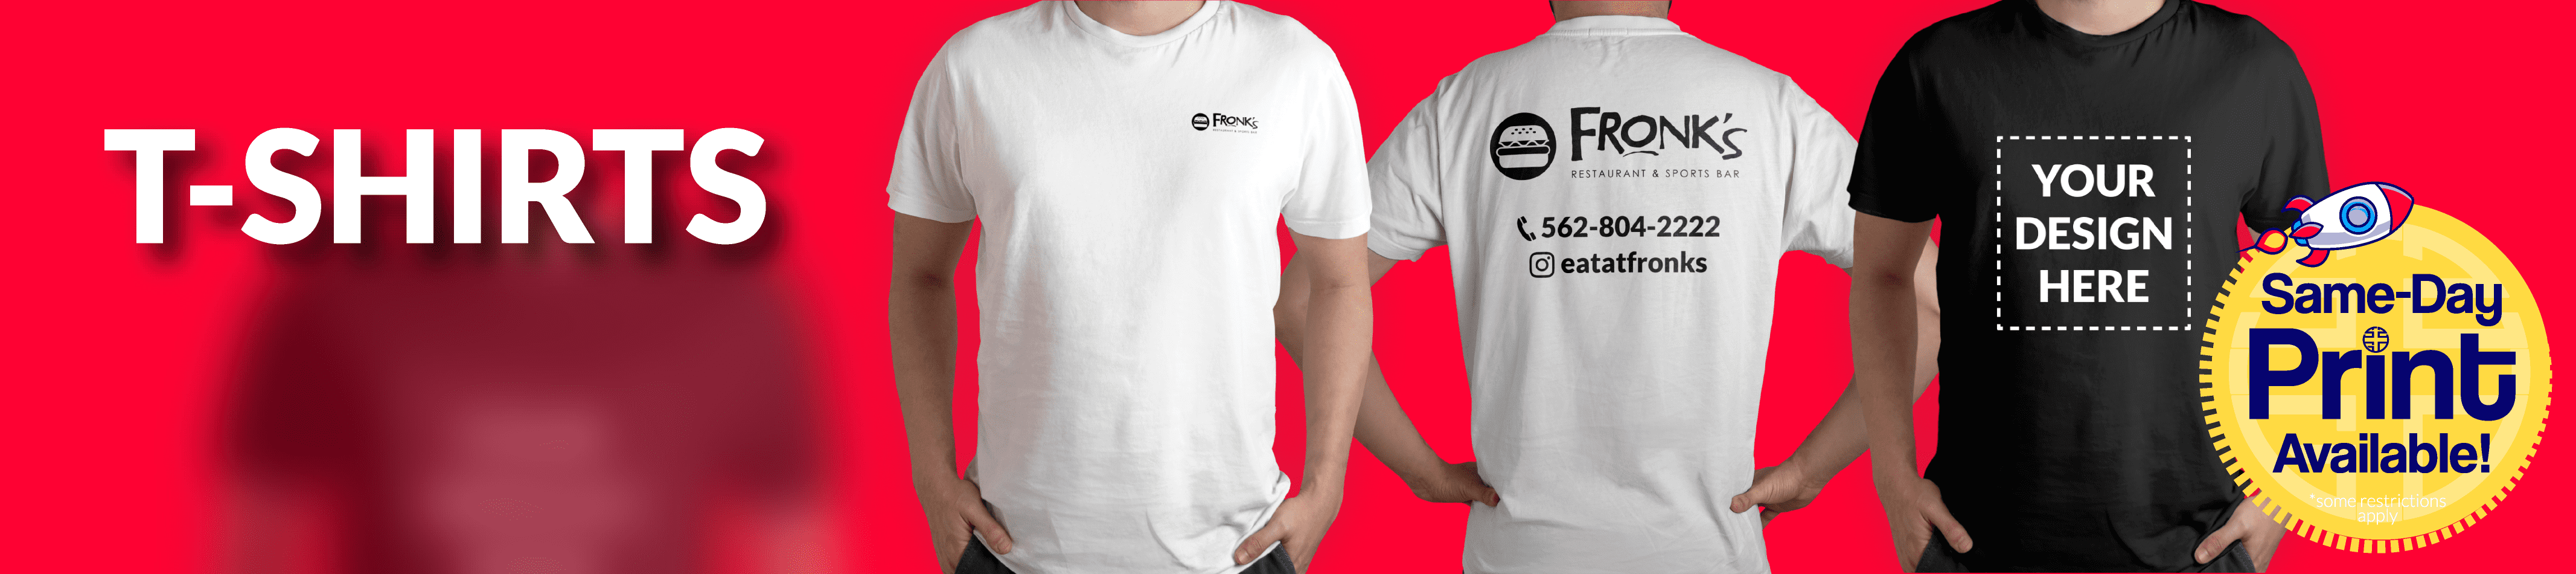 This image refers to our T-shirts promotion with Same Day Print Available. To learn more about T-shirts, feel free to check out the 'Products' section in the menu. Happy exploring!